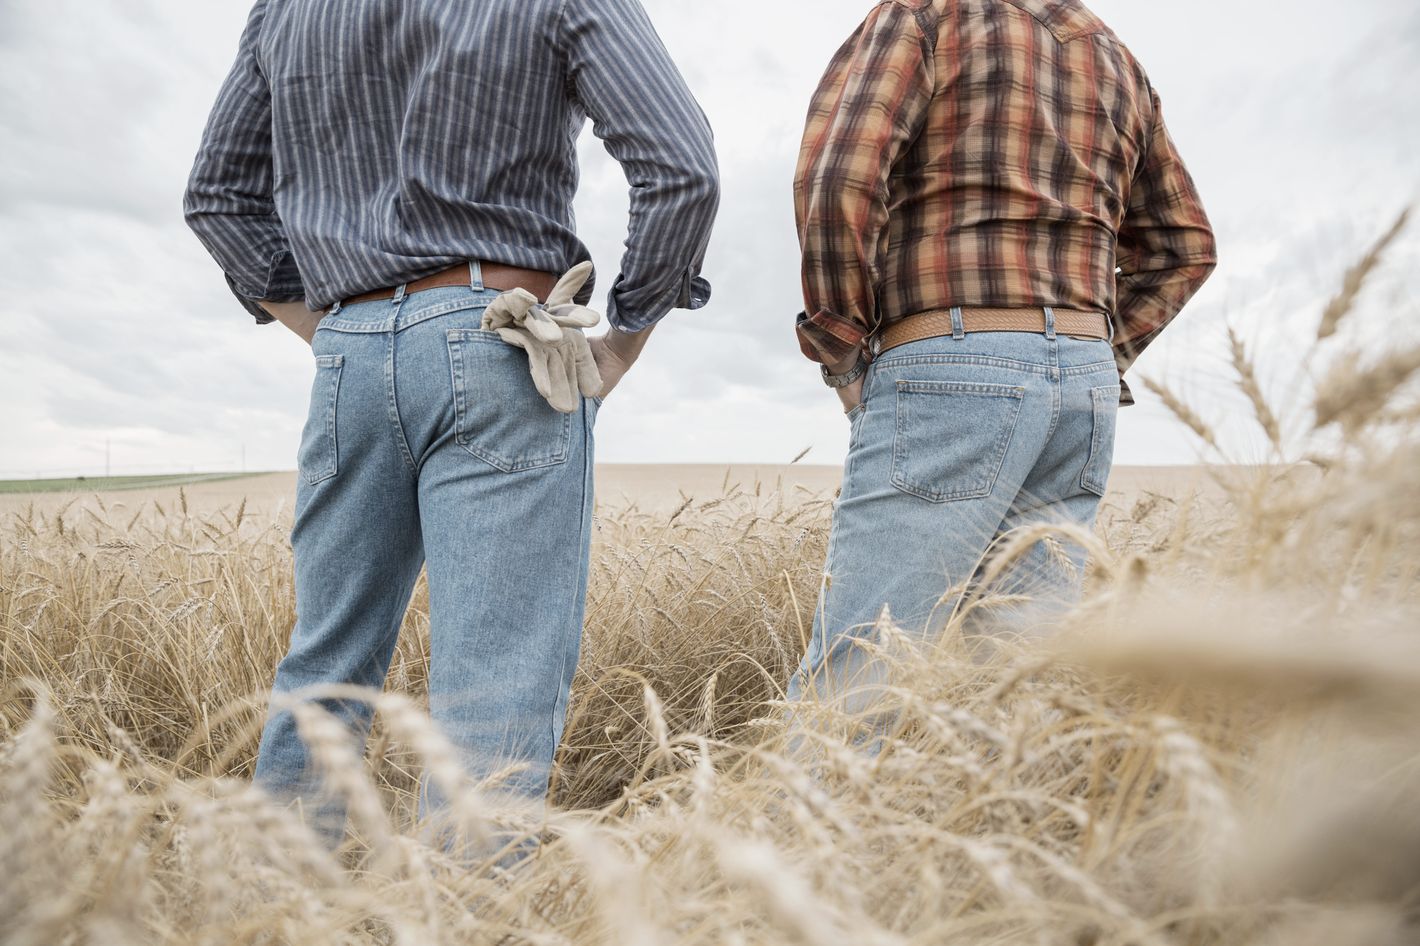 Why Straight Rural Men Have Gay Bud-Sex With Each Other -- Science of Us photo